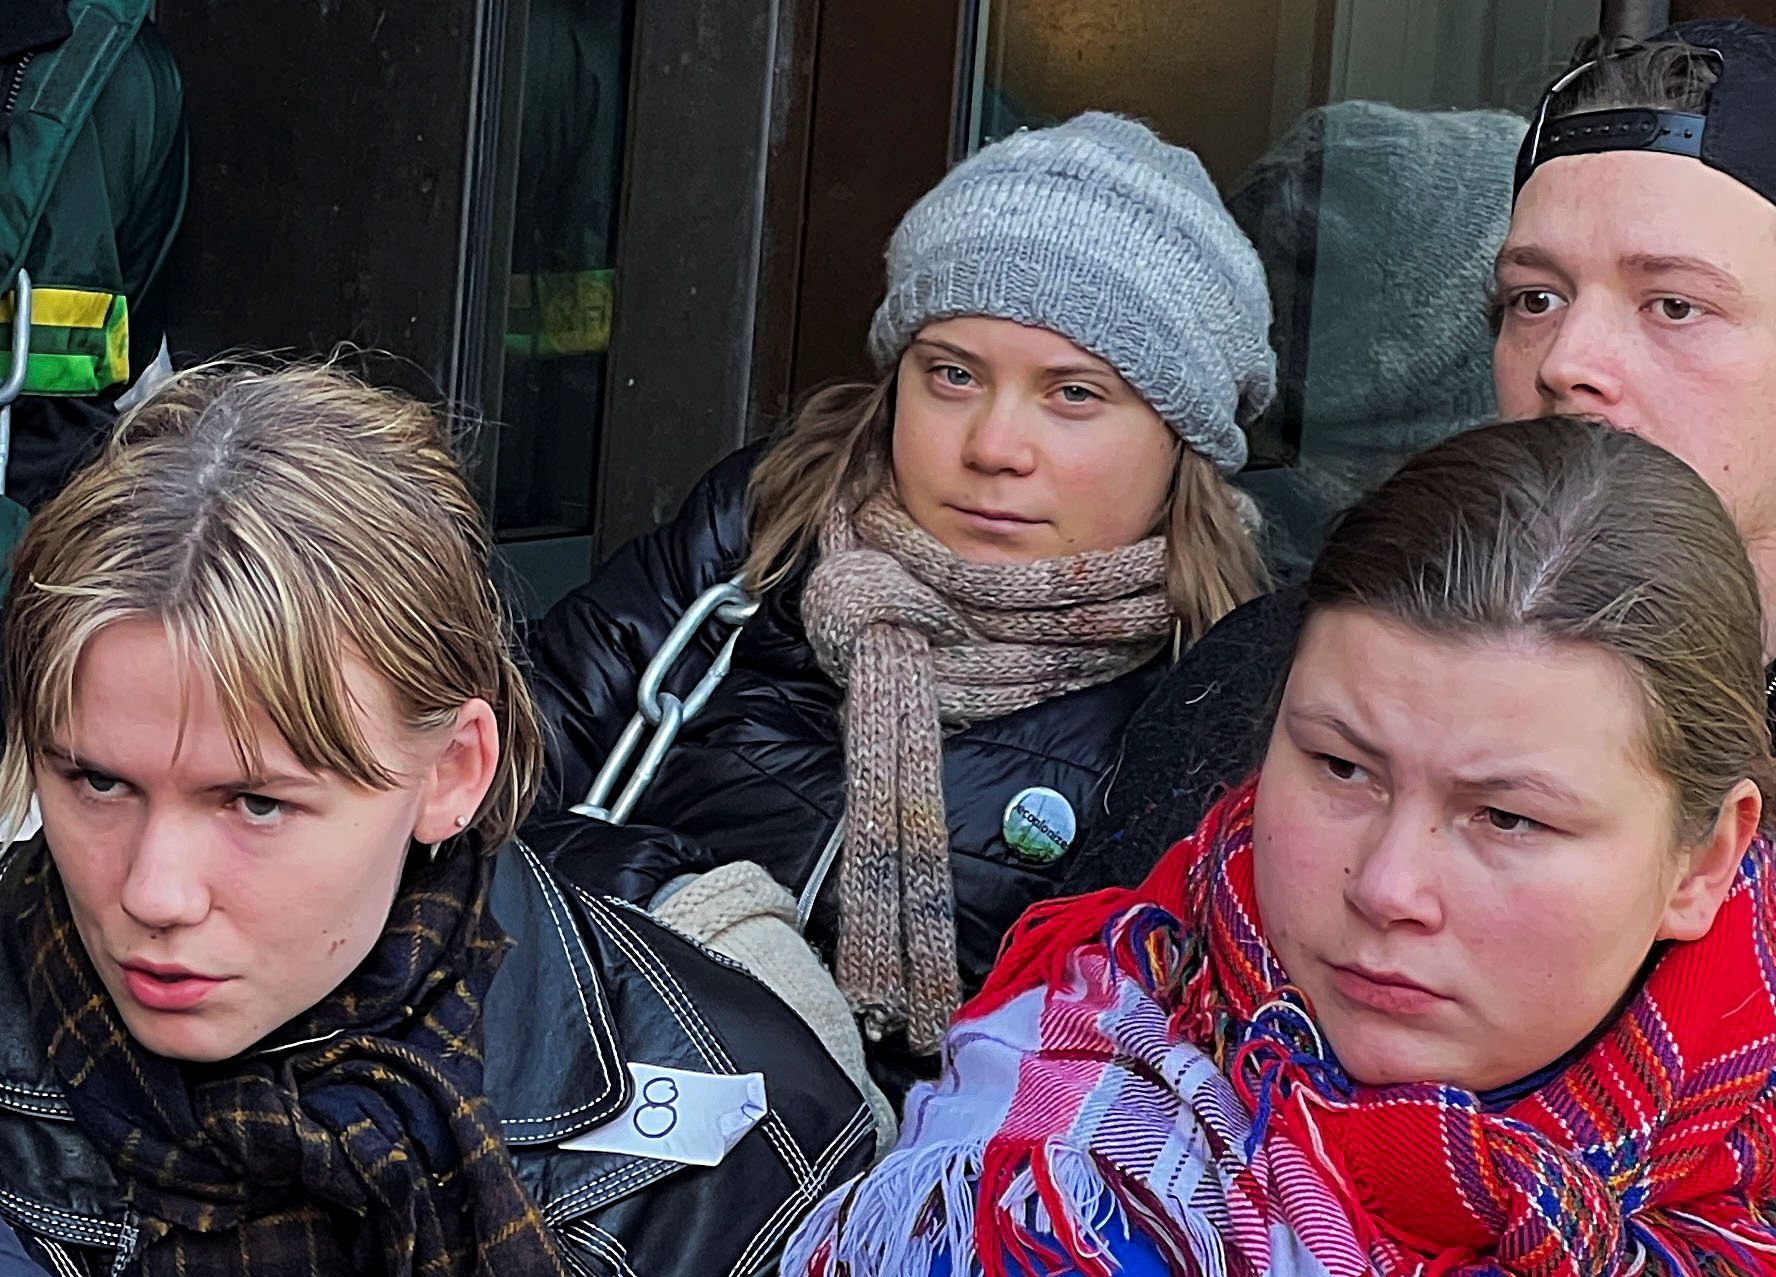 Greta Thunberg and other climate activists in Norway